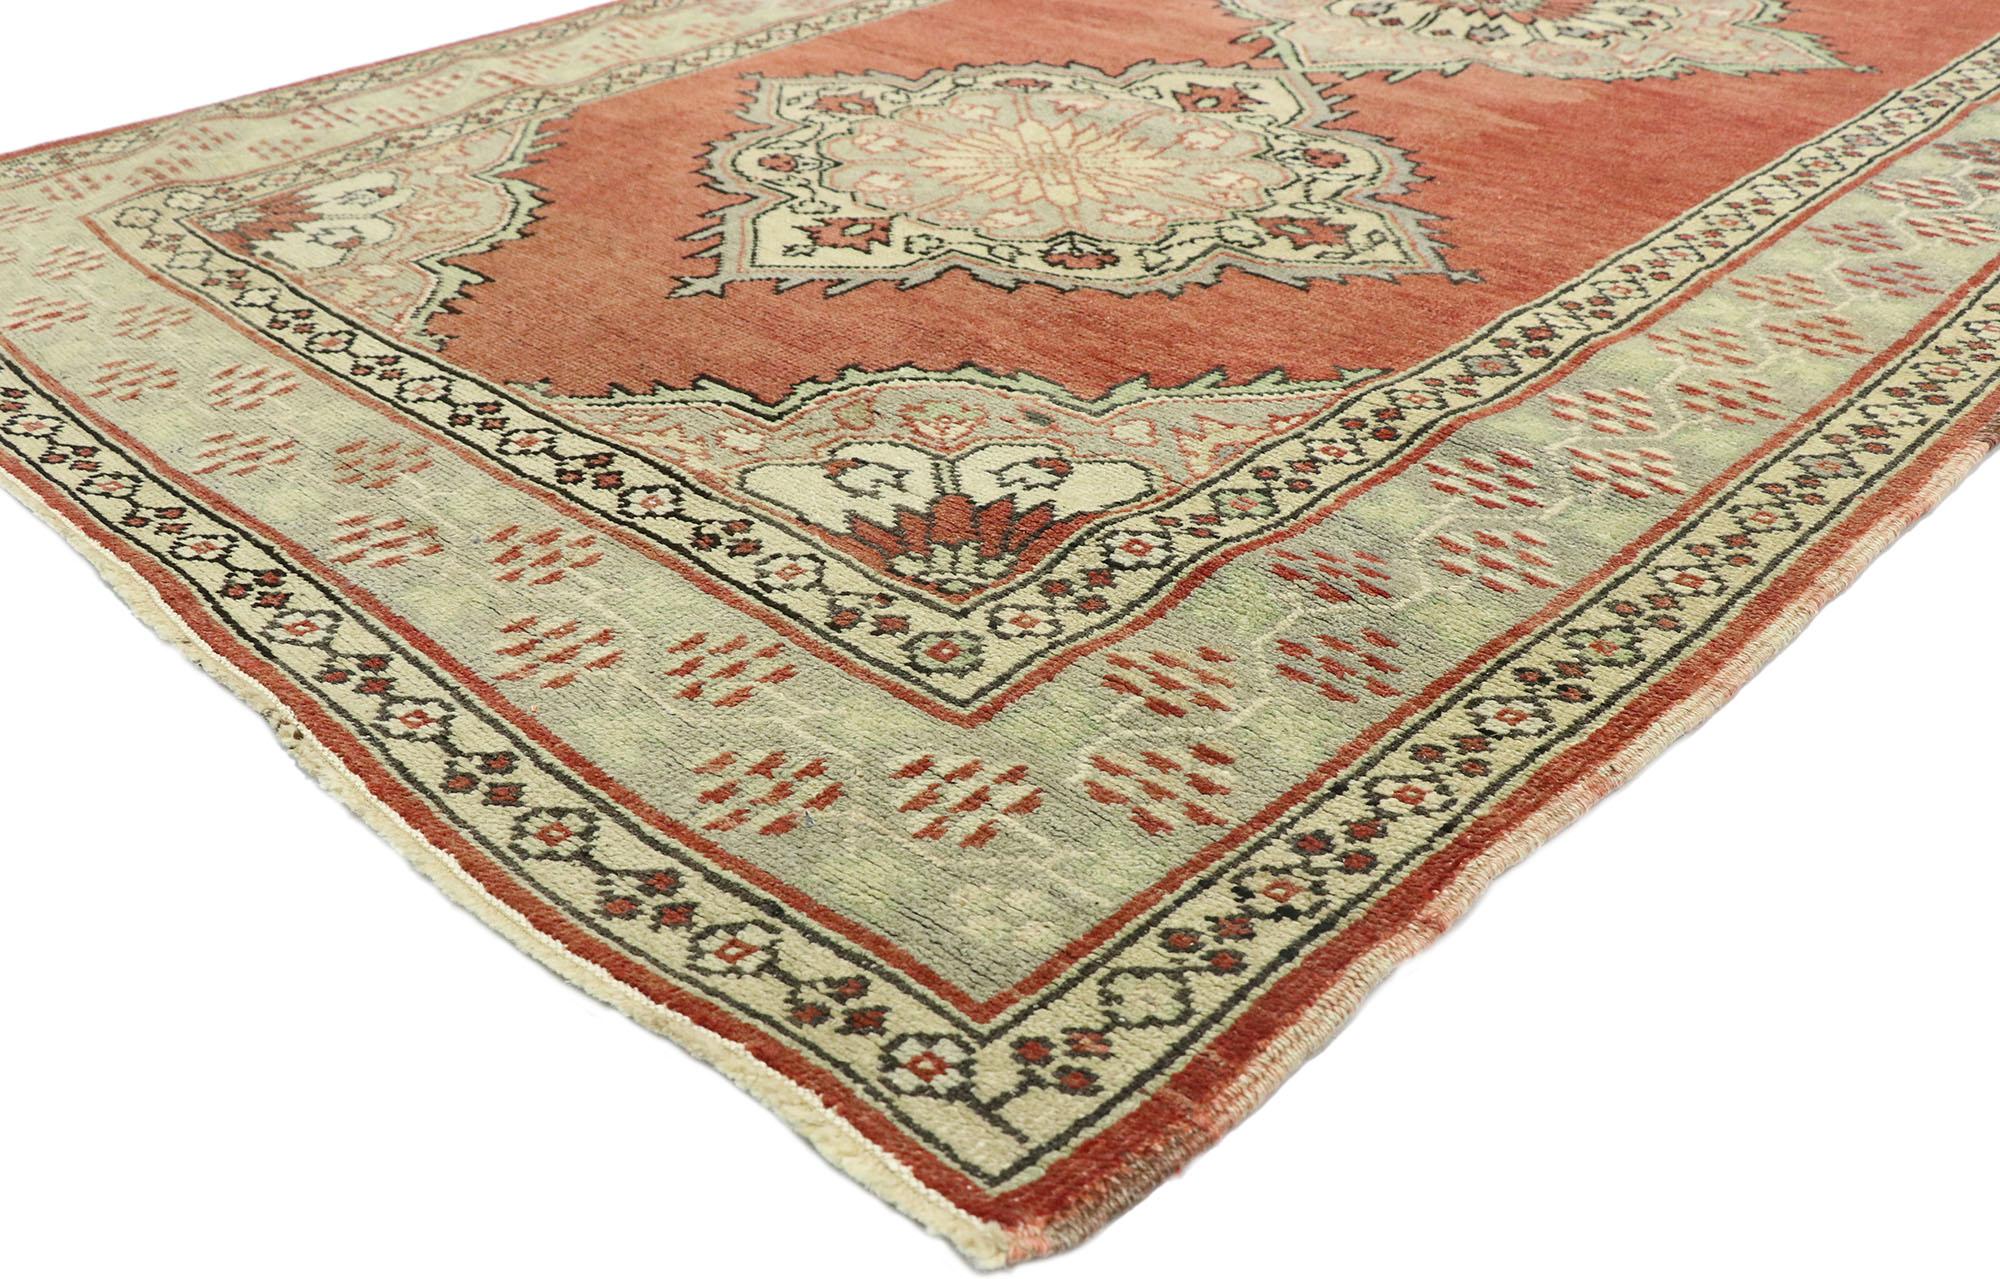 52170 Vintage Turkish Oushak Extra-Long Runner with Modern Tudor Style. This hand-knotted wool vintage Turkish Oushak runner features eight cusped medallions patterned with roundels and palmettes floating in an abrashed crimson field. Ornate